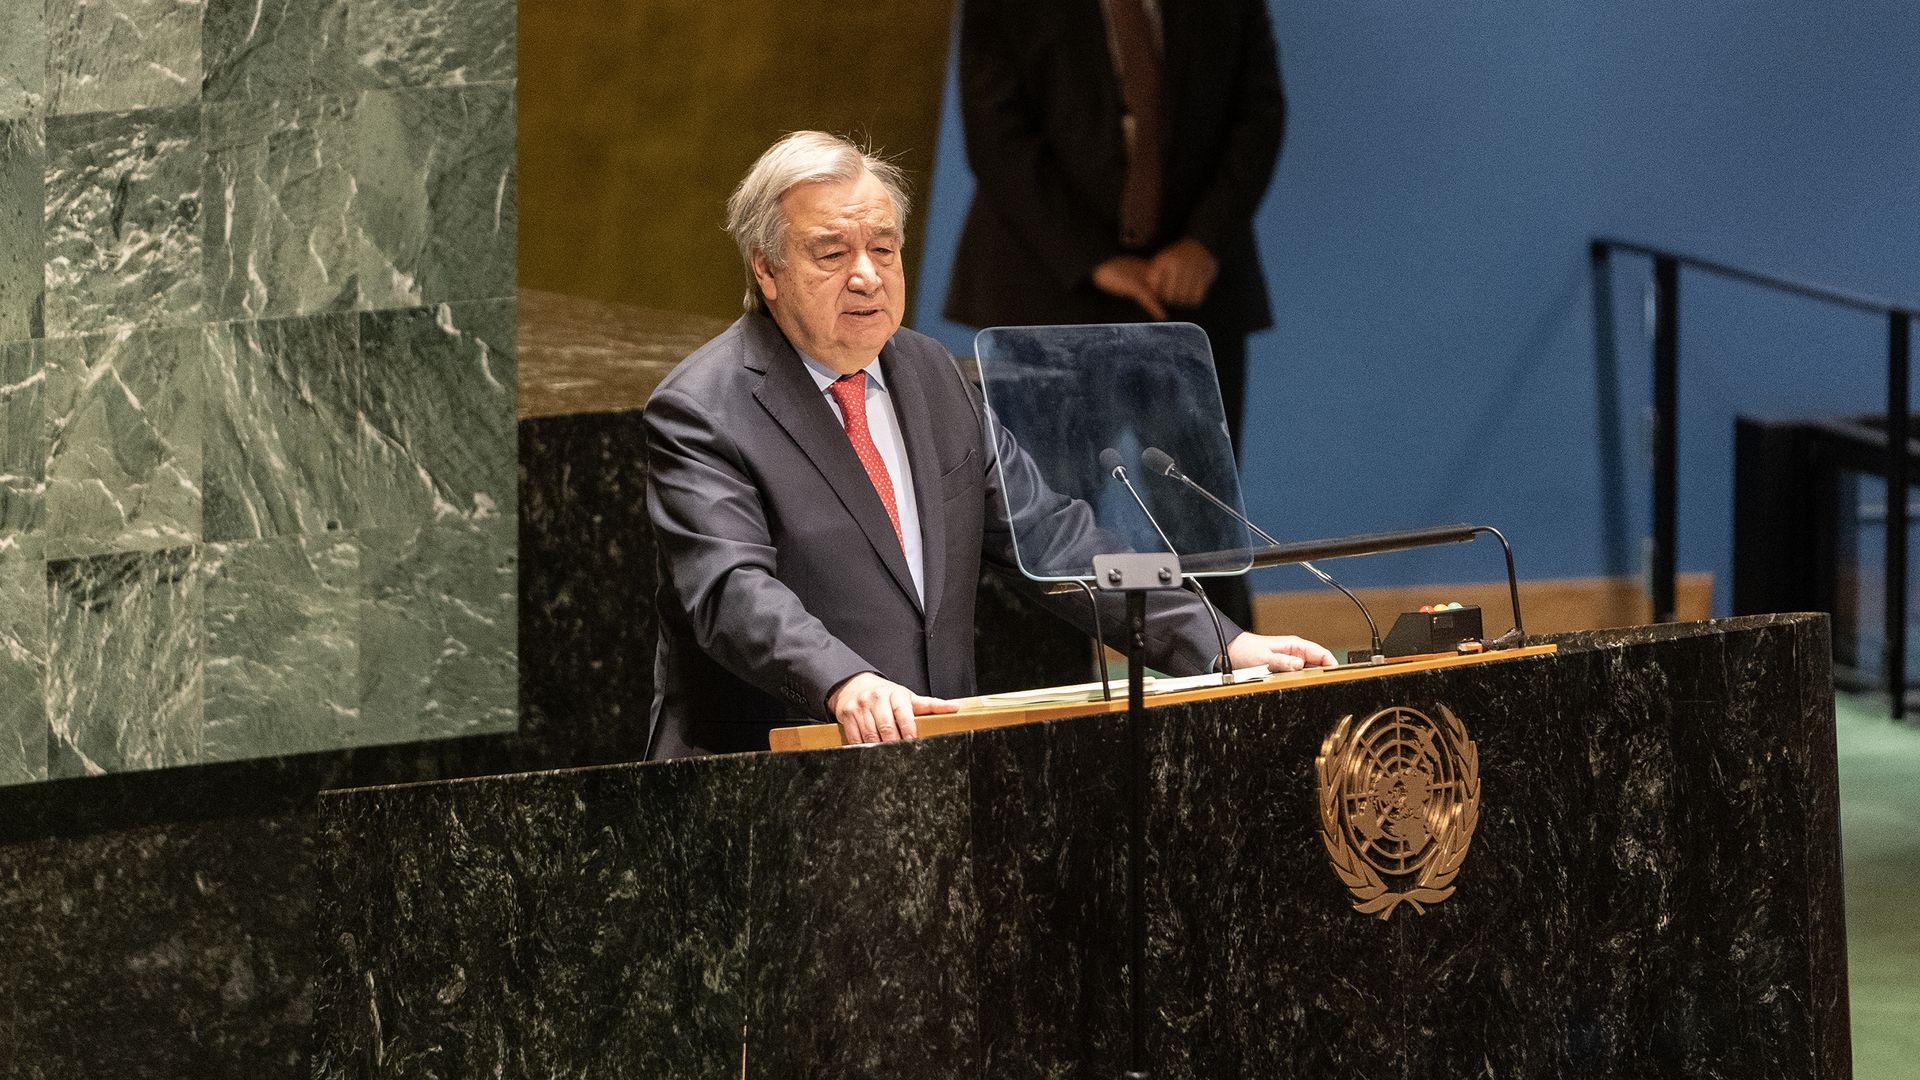 UN Secretary-General António Guterres speaking during the General Assembly in New York City on Feb. 6.